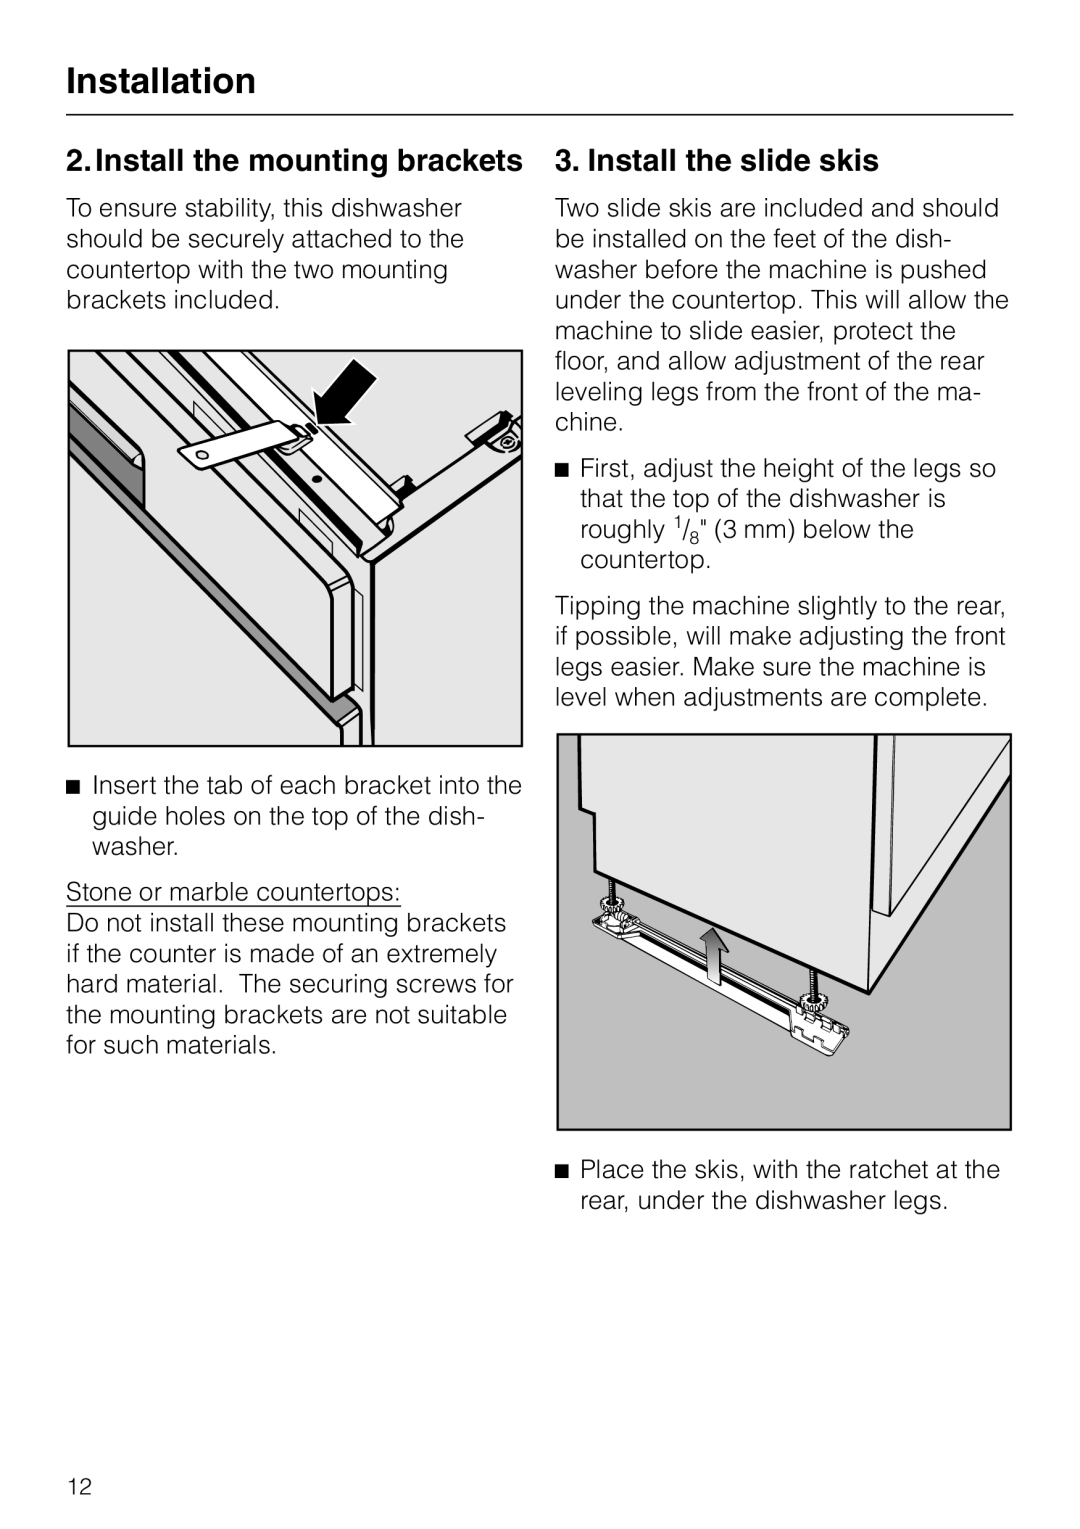 Miele HG02 installation instructions Installation, Install the mounting brackets, Install the slide skis 